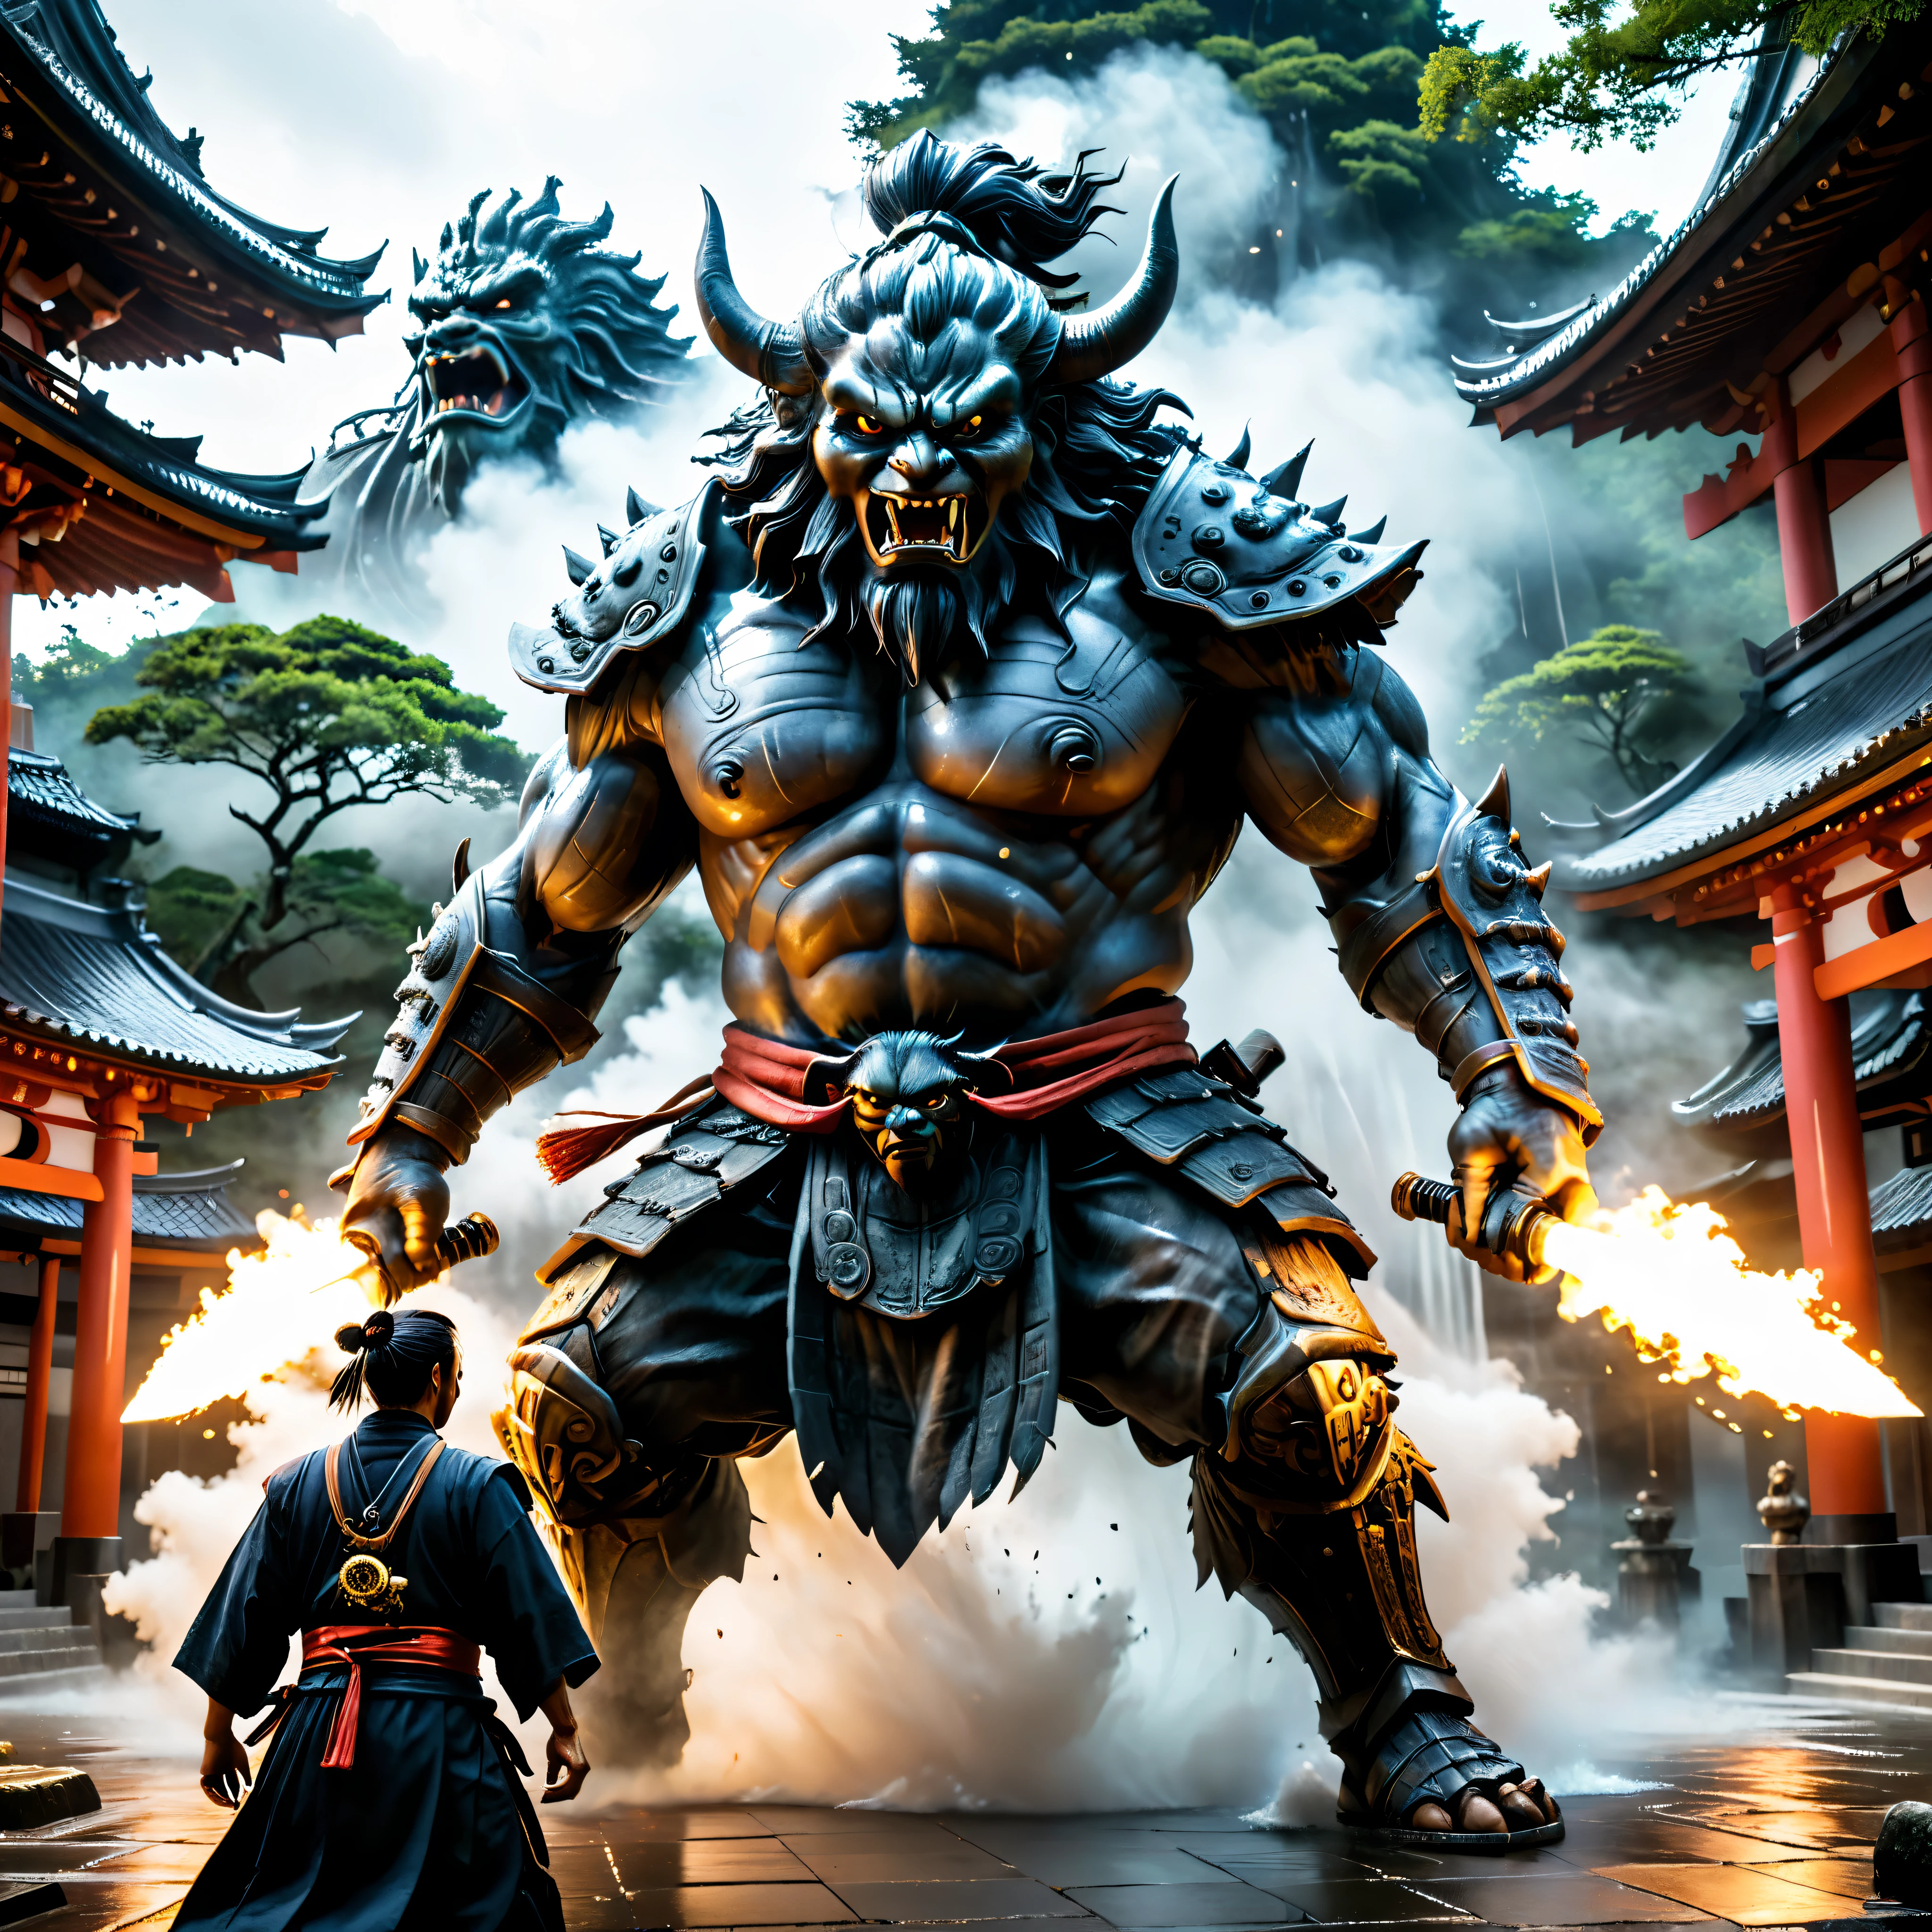 ((Masterpiece in maximum 16K resolution):1.6),((soft_color_photograpy:)1.5), ((Ultra-Detailed):1.4),((Movie-like still images and dynamic angles):1.3),((final showdown scene):1.1) | (Cinematic photo of a samurai facing a giant yokai monster at a temple), (cinematic lens), (samurai), (giant yokai), (shimmer), (tyndall effect), (visual experience), (Realism), (Realistic), award-winning graphics, dark shot, film grain, extremely detailed, Digital Art, rtx, Unreal Engine, scene concept anti glare effect, All captured with sharp focus.